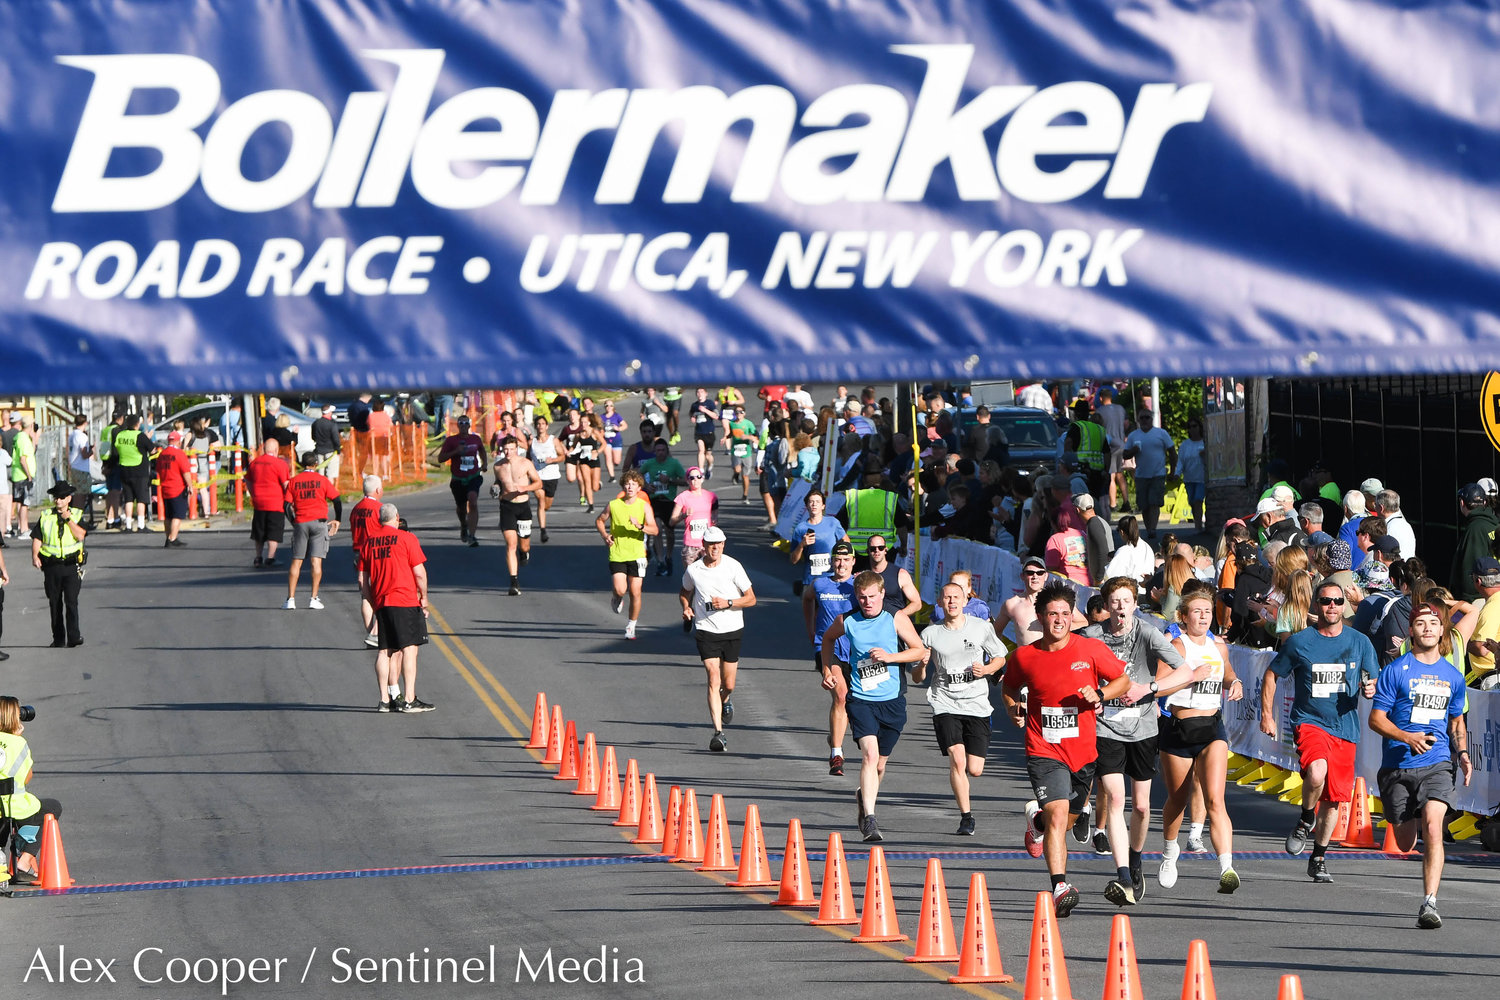 5K runners make their way to the finish line during the 45th Boilermaker Road Race on Sunday, July 10 in Utica.